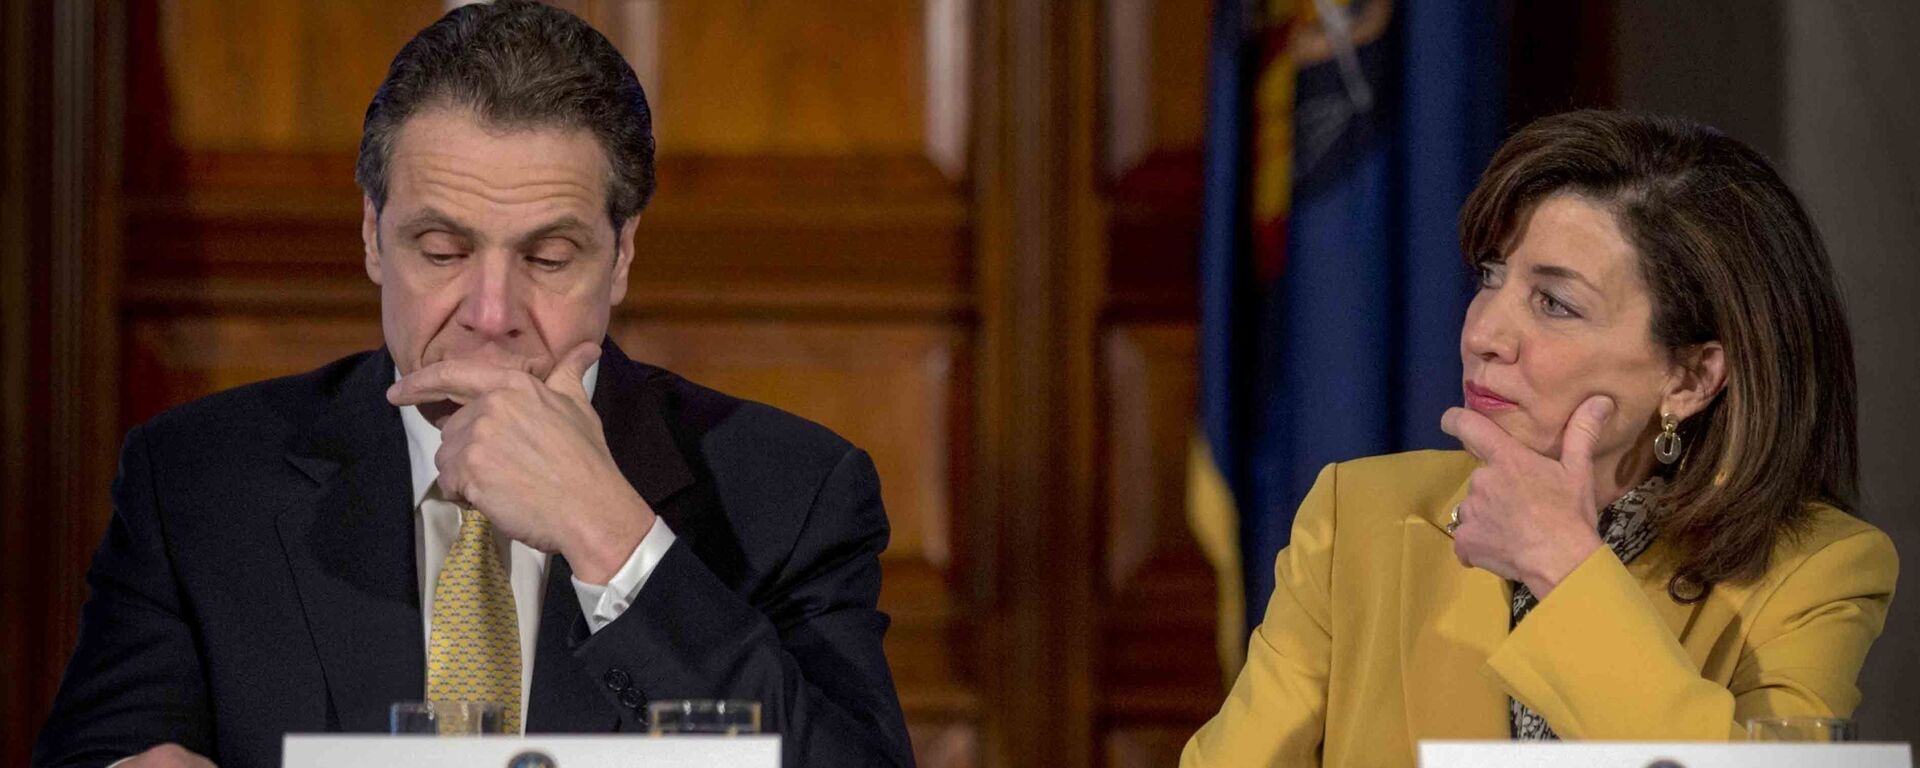 FILE - This photo from Wednesday, Feb. 25, 2015, shows New York Gov. Andrew Cuomo, left, and Lt. Gov. Kathy Hochul during a cabinet meeting at the Capitol in Albany, N.Y. Cuomo faces possible impeachment following findings from an independent investigation overseen by state Attorney General Letitia James - Sputnik International, 1920, 10.08.2021